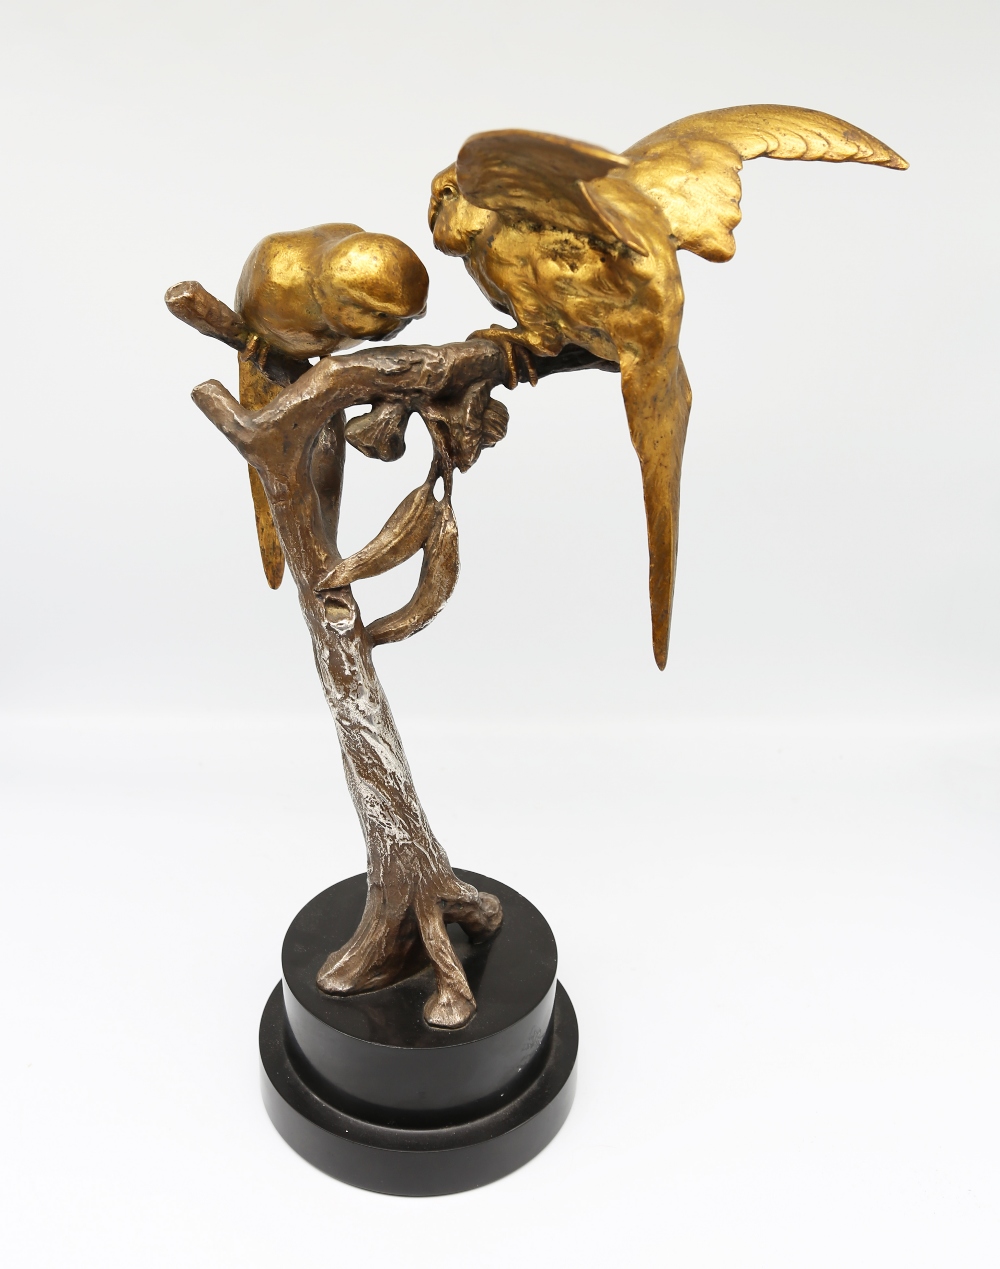 A French 20th century gilded bronze model of Love Birds signed R Durquet on polished stone plinth. - Image 2 of 4